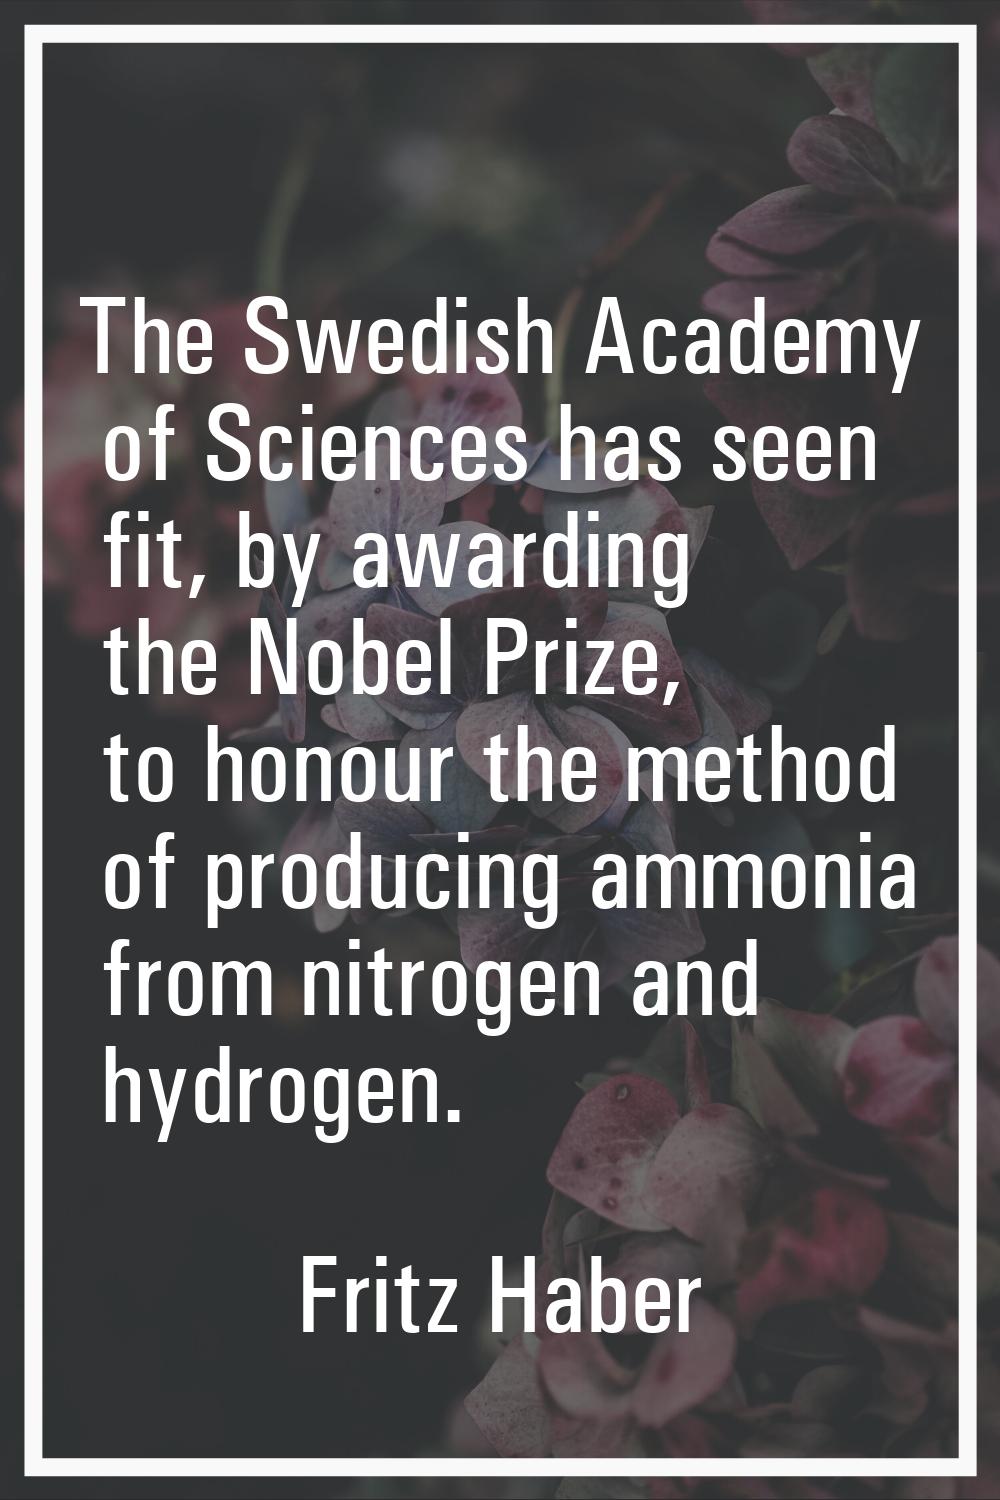 The Swedish Academy of Sciences has seen fit, by awarding the Nobel Prize, to honour the method of 